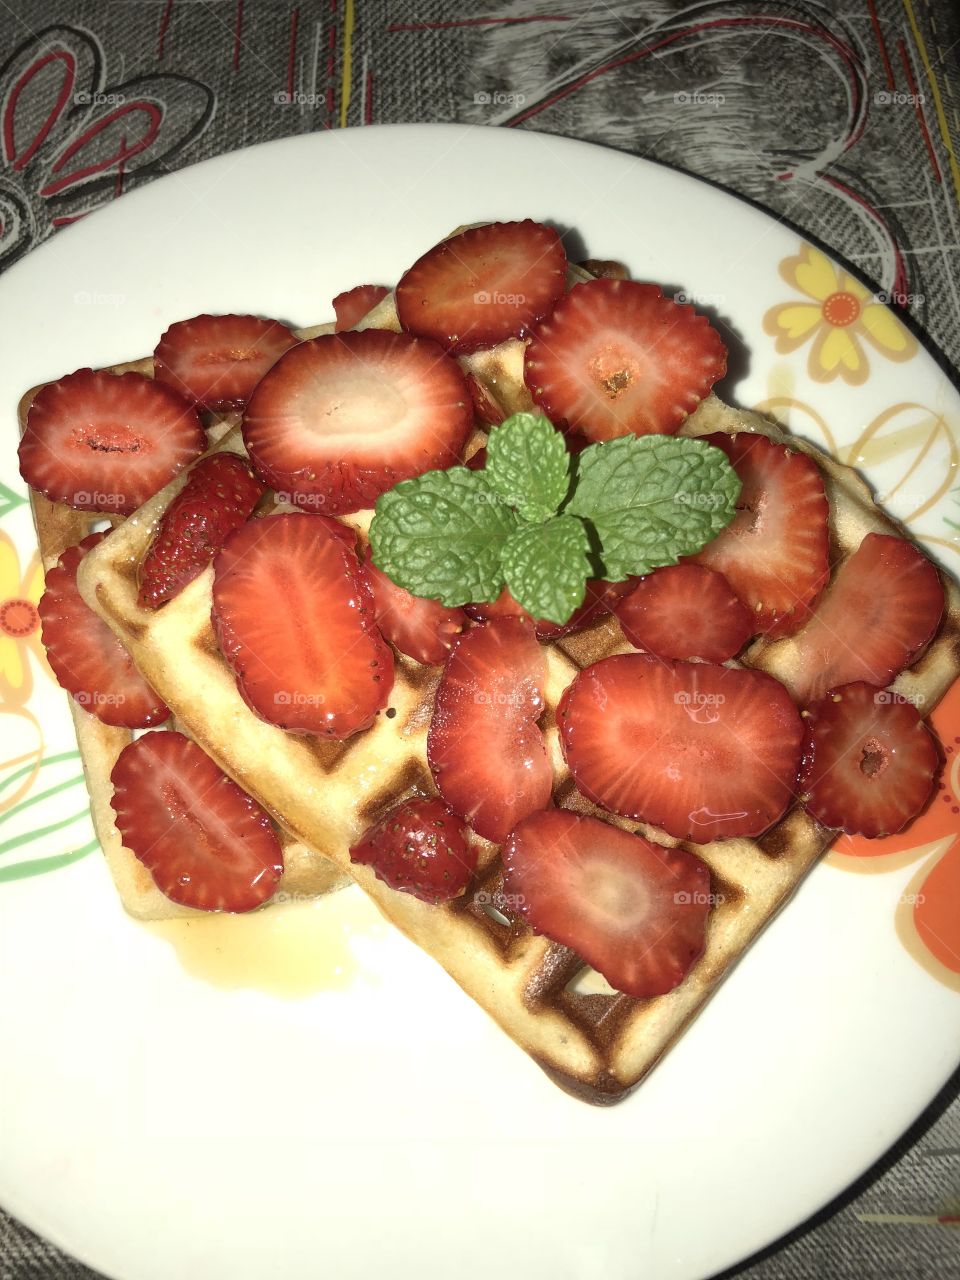 Waffles with strawberries something that my daughter loves 